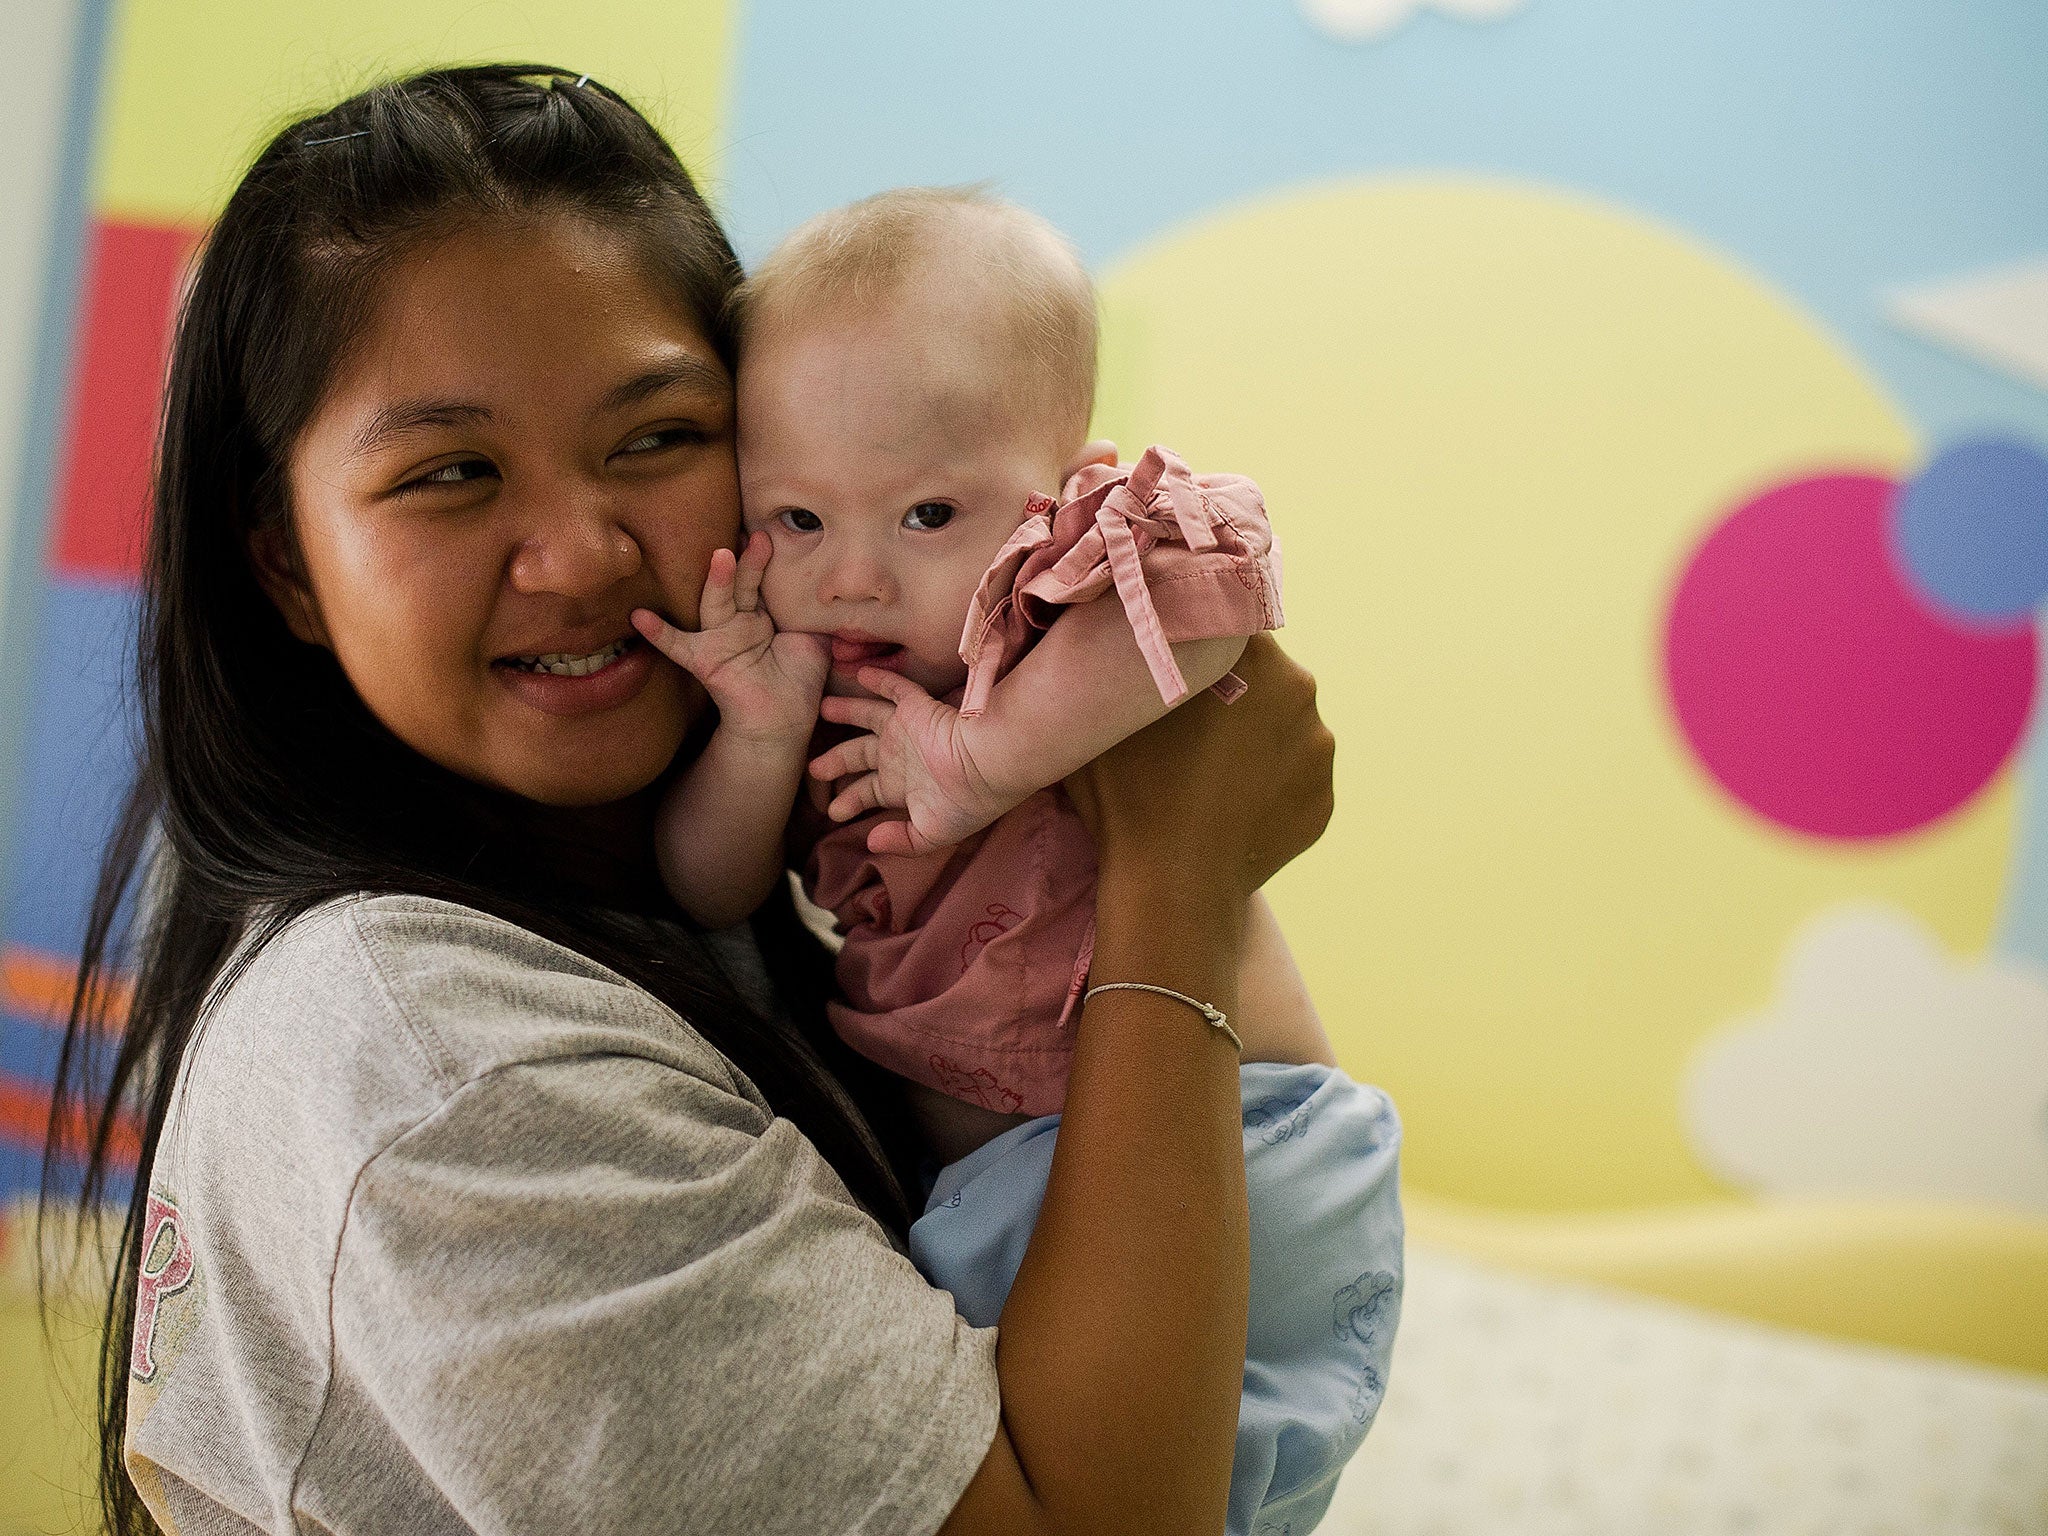 Thai surrogate mother Pattaramon Chanbua (L) holds her baby Gammy, born with Down Syndrome, at the Samitivej hospital, Sriracha district in Chonburi province on August 4, 2014. The surrogate mother of a baby reportedly abandoned by his Australian parents